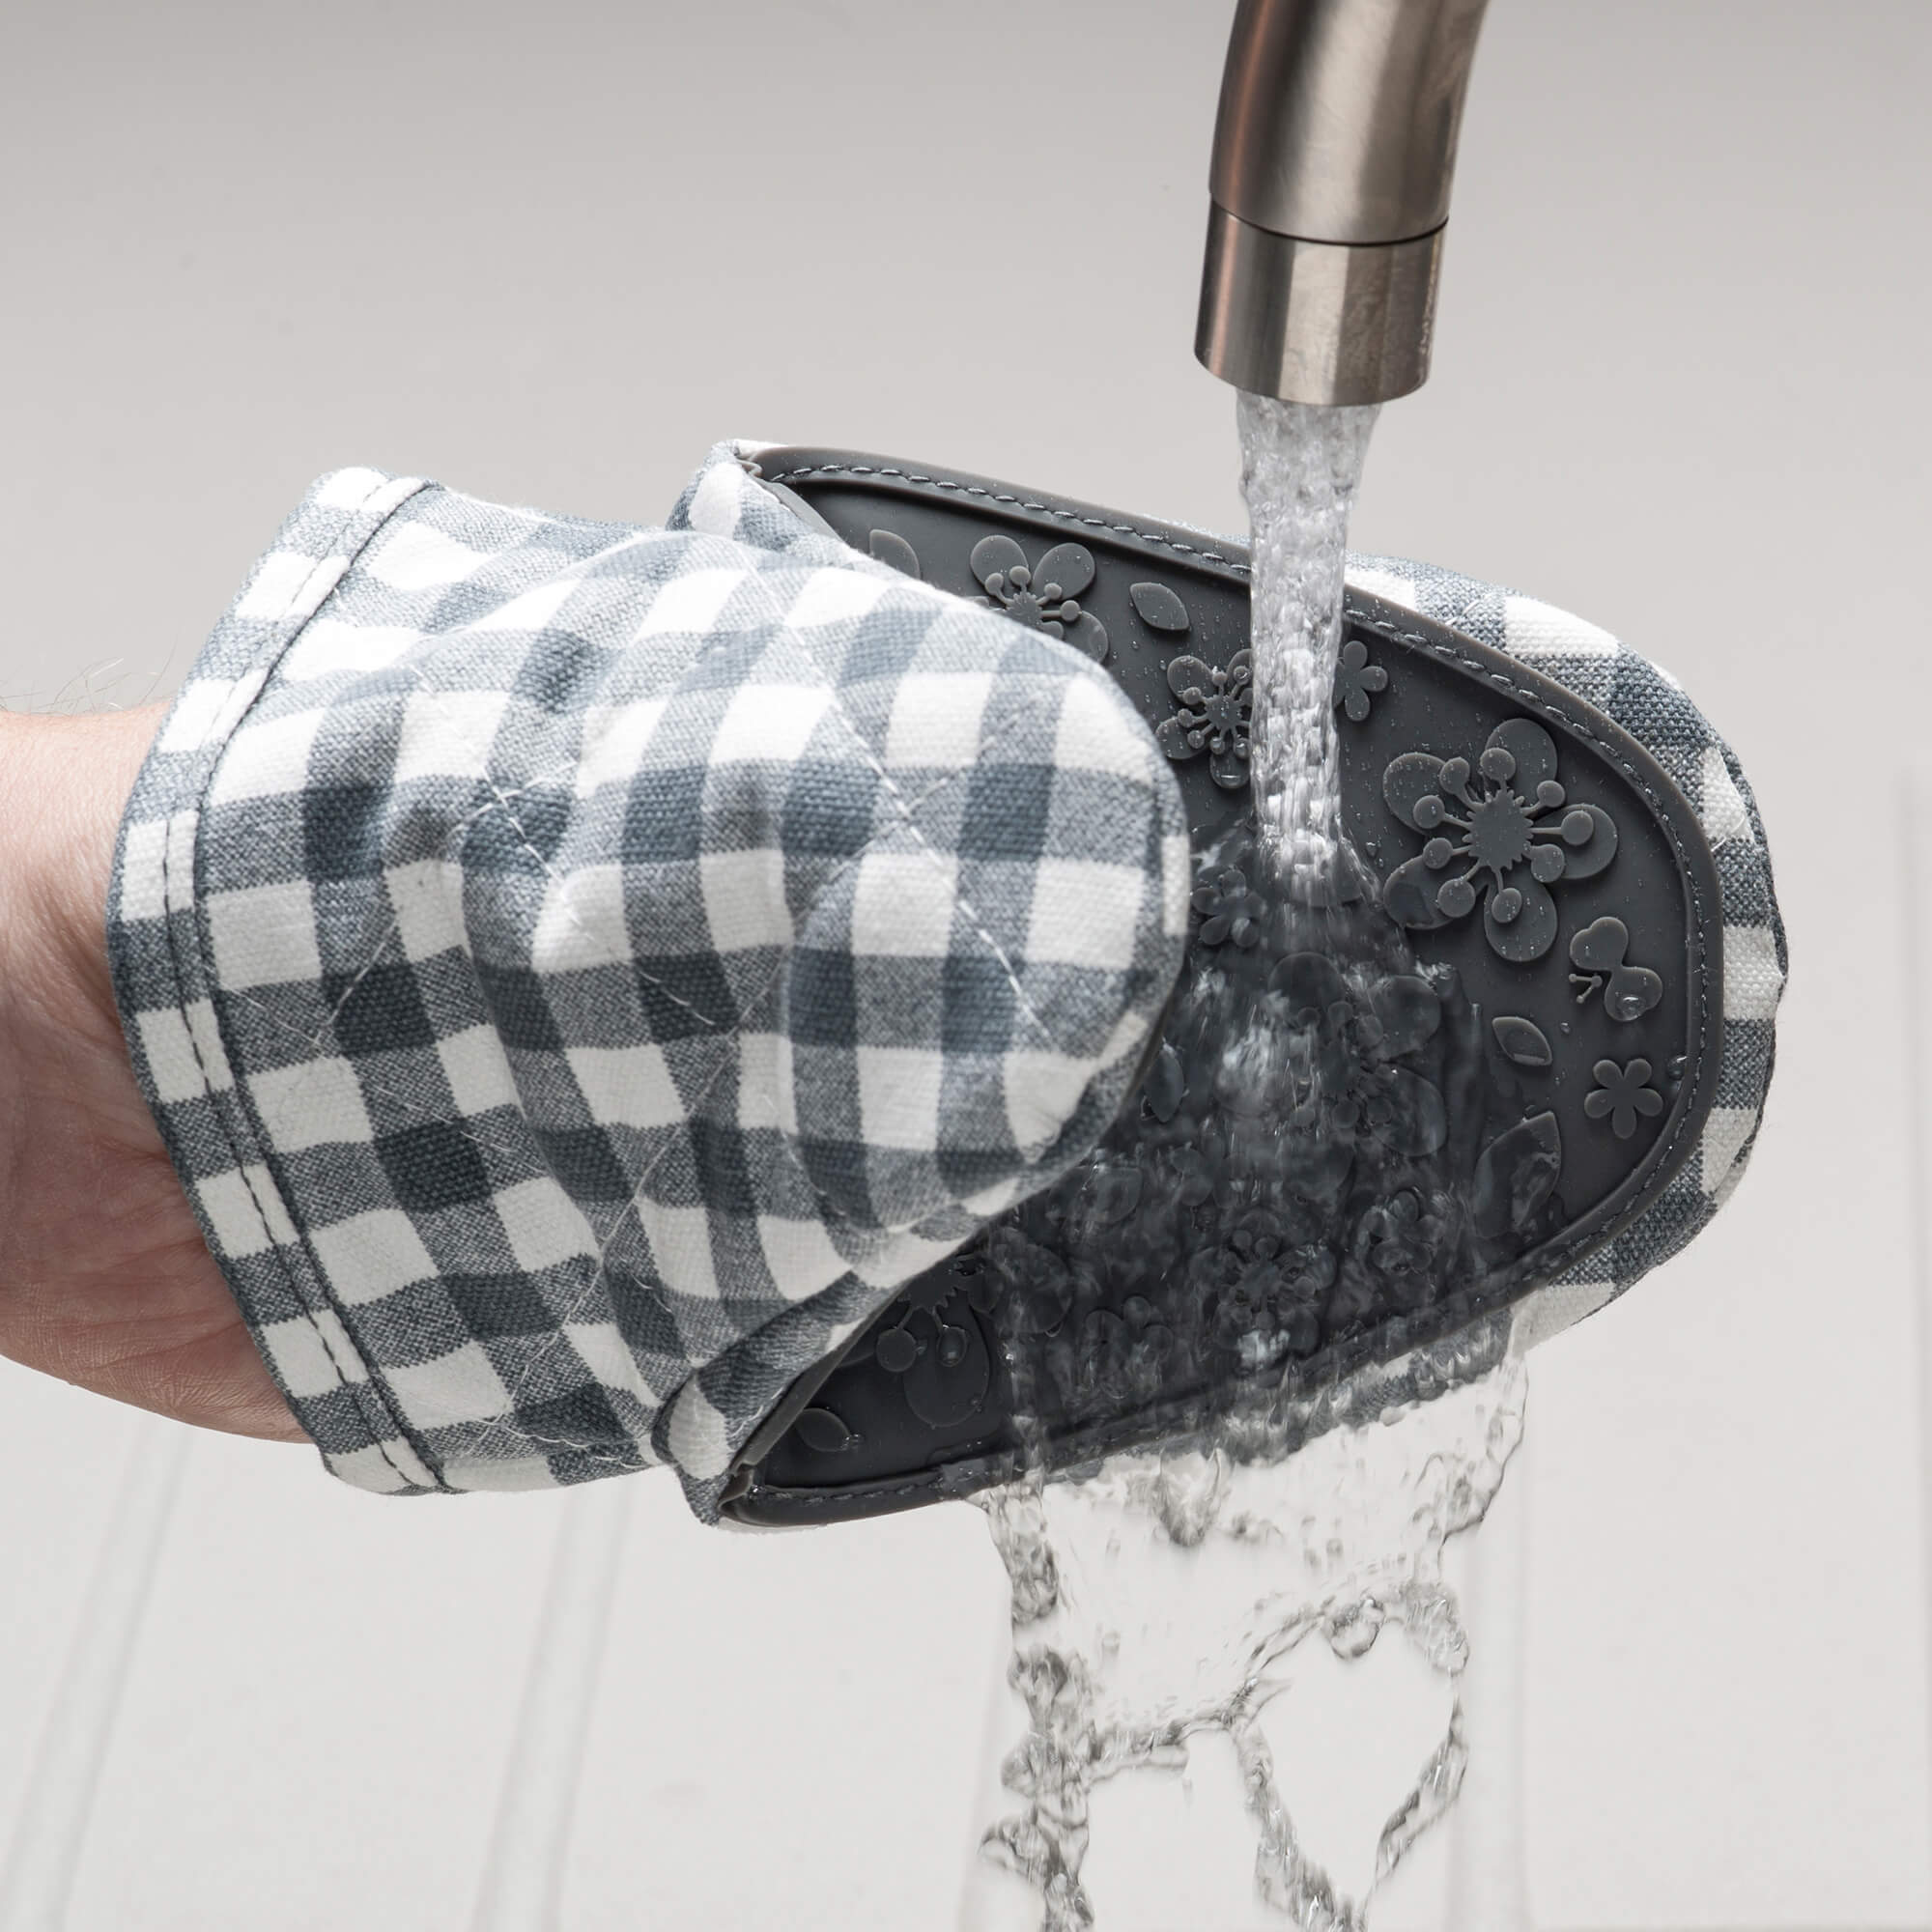 Zeal Hot Grab Kitchen Helper easily washed under a tap